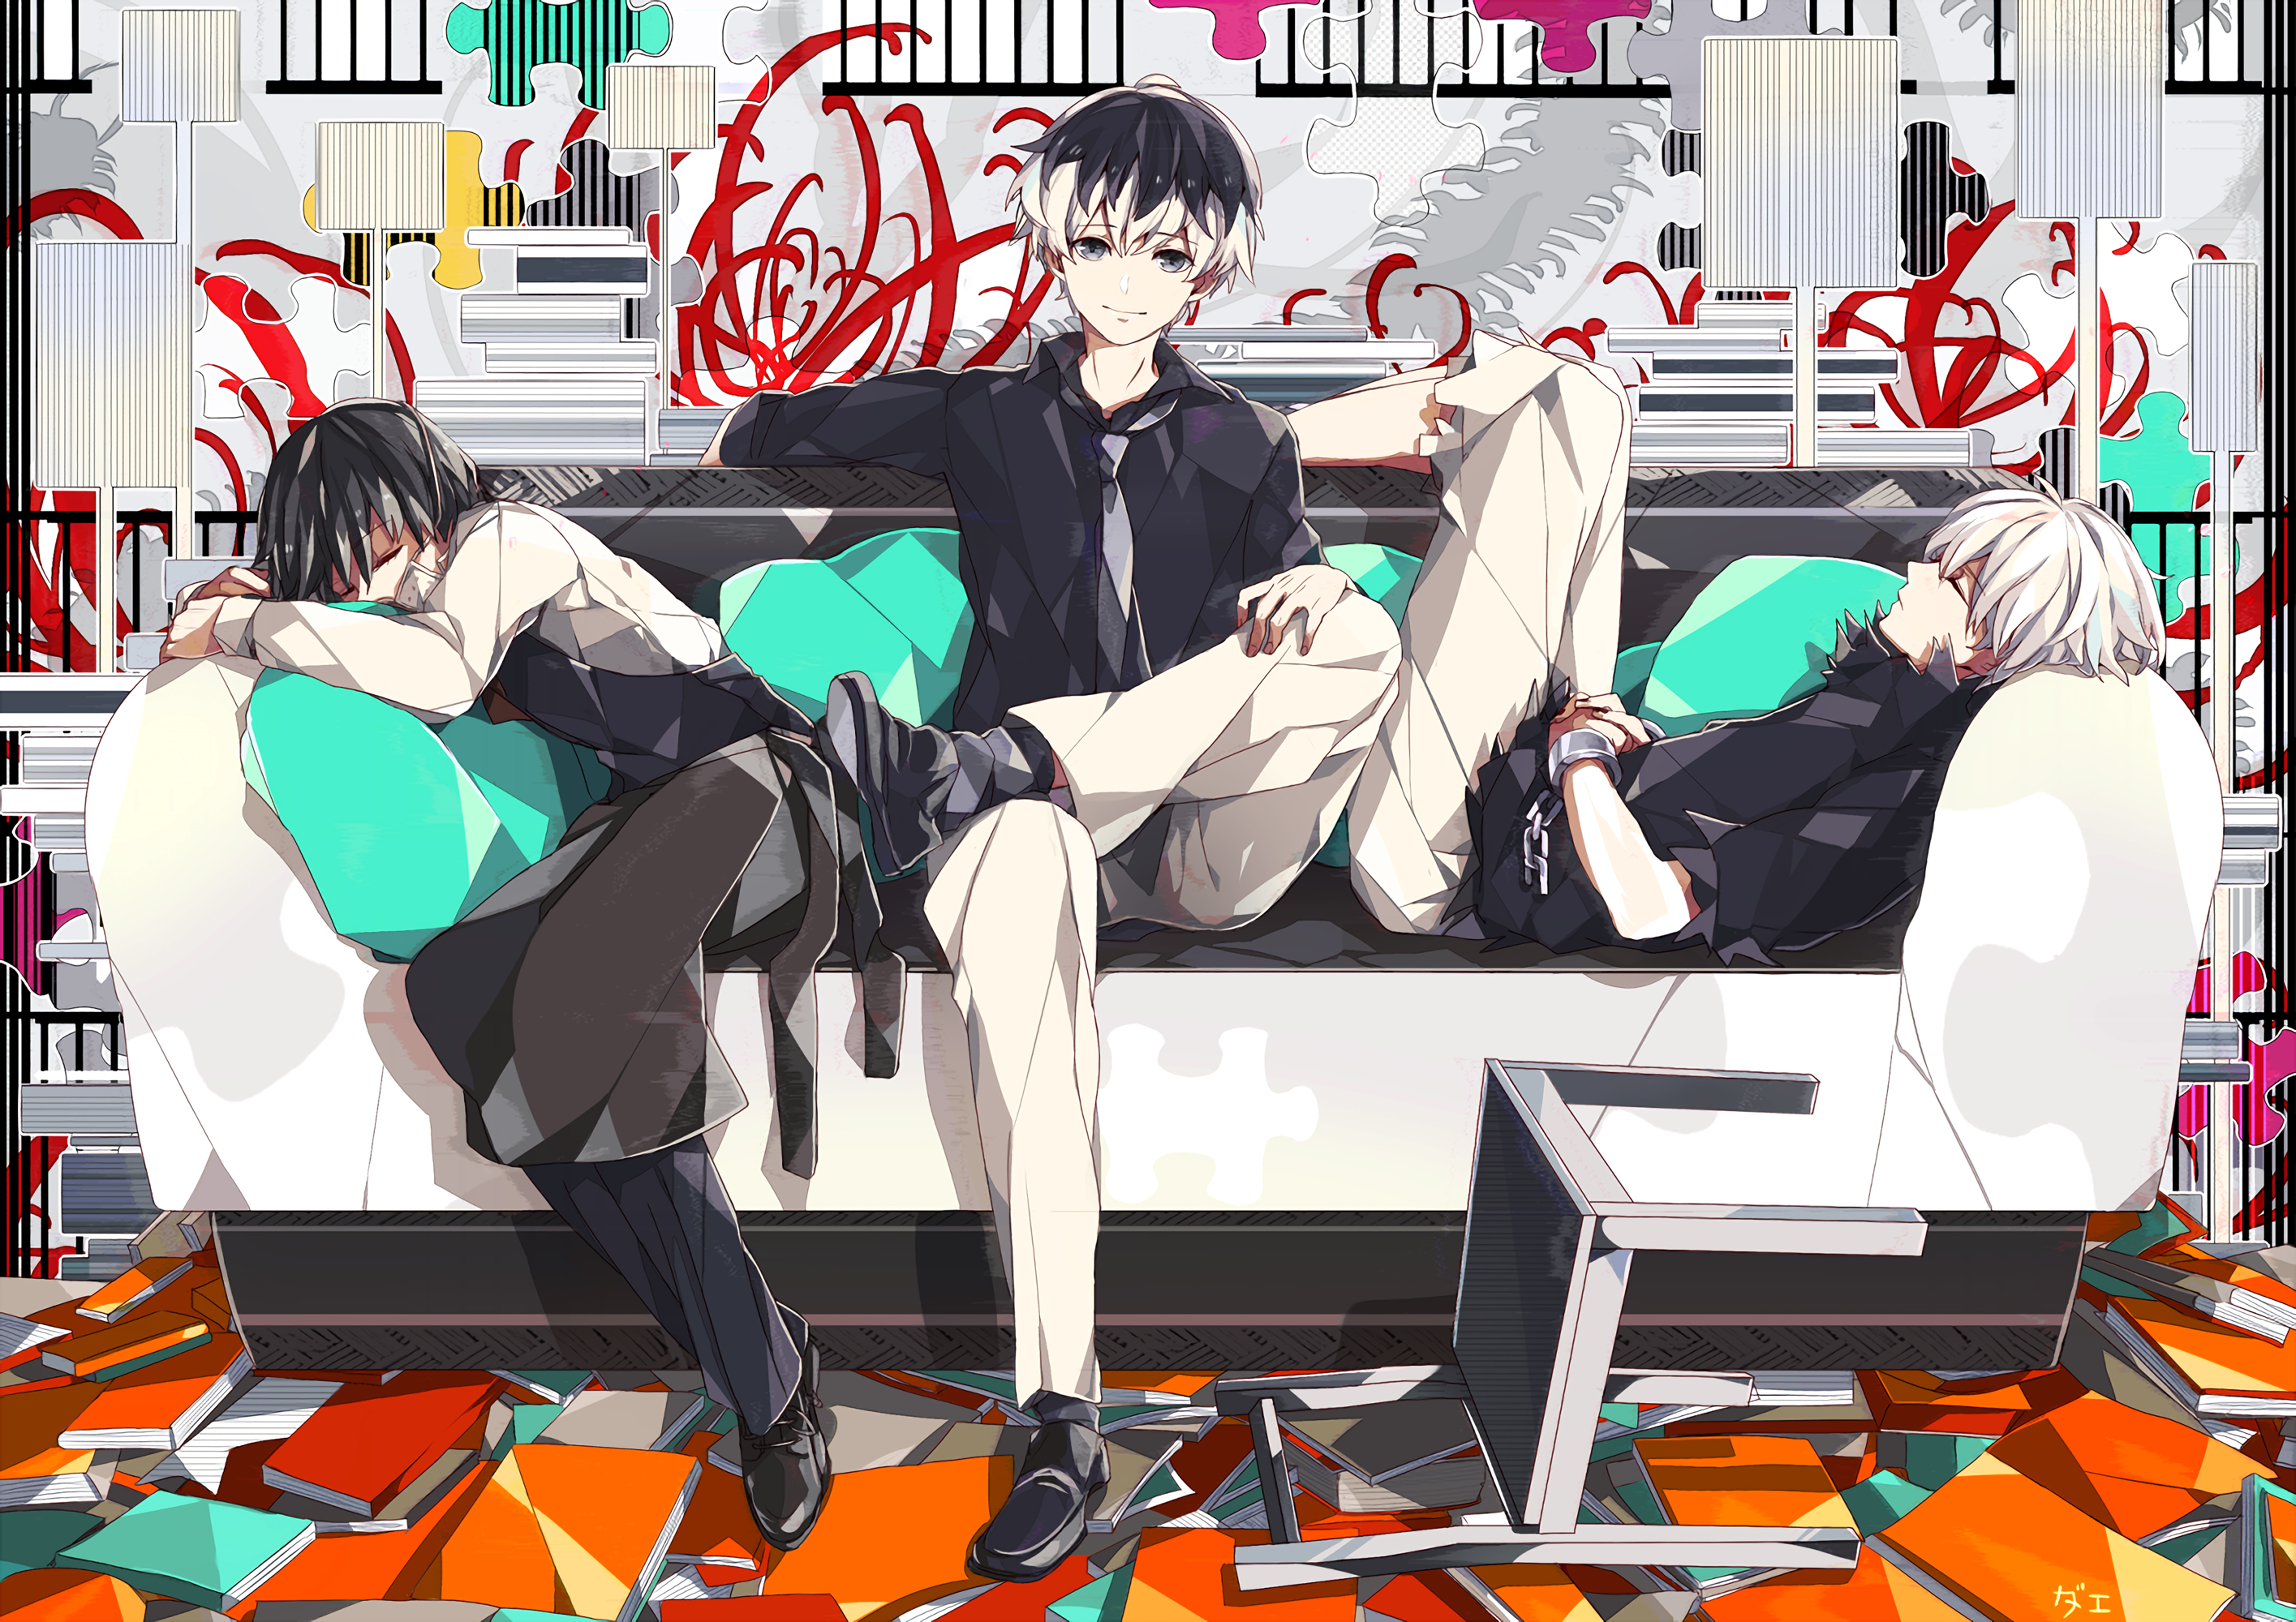 Action Figures Anime Boys Tokyo Ghoul Closed Eyes 3840x2712